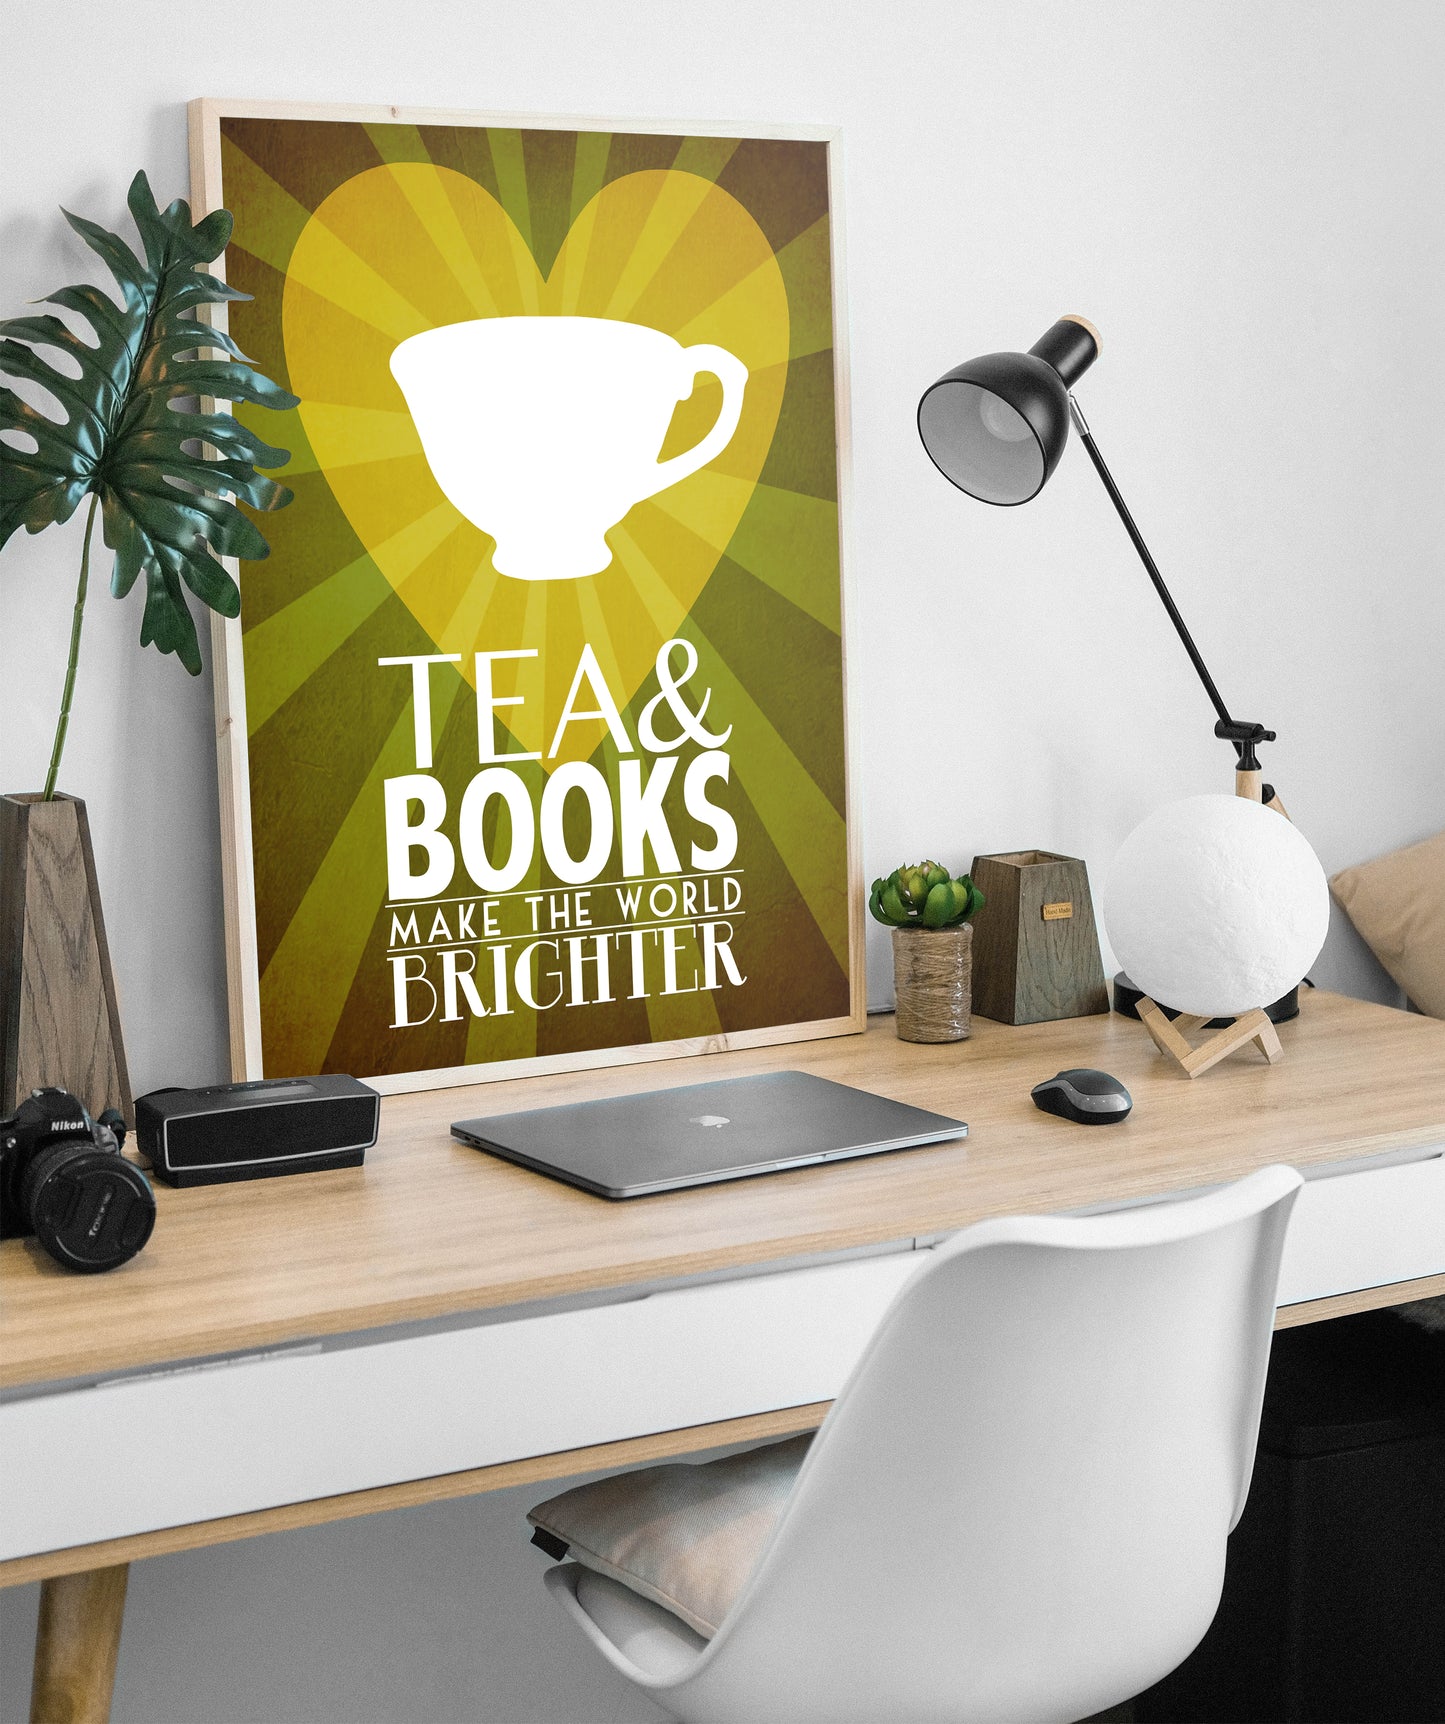 Books and Tea Lovers Art Print, Library and Kitchen Decor